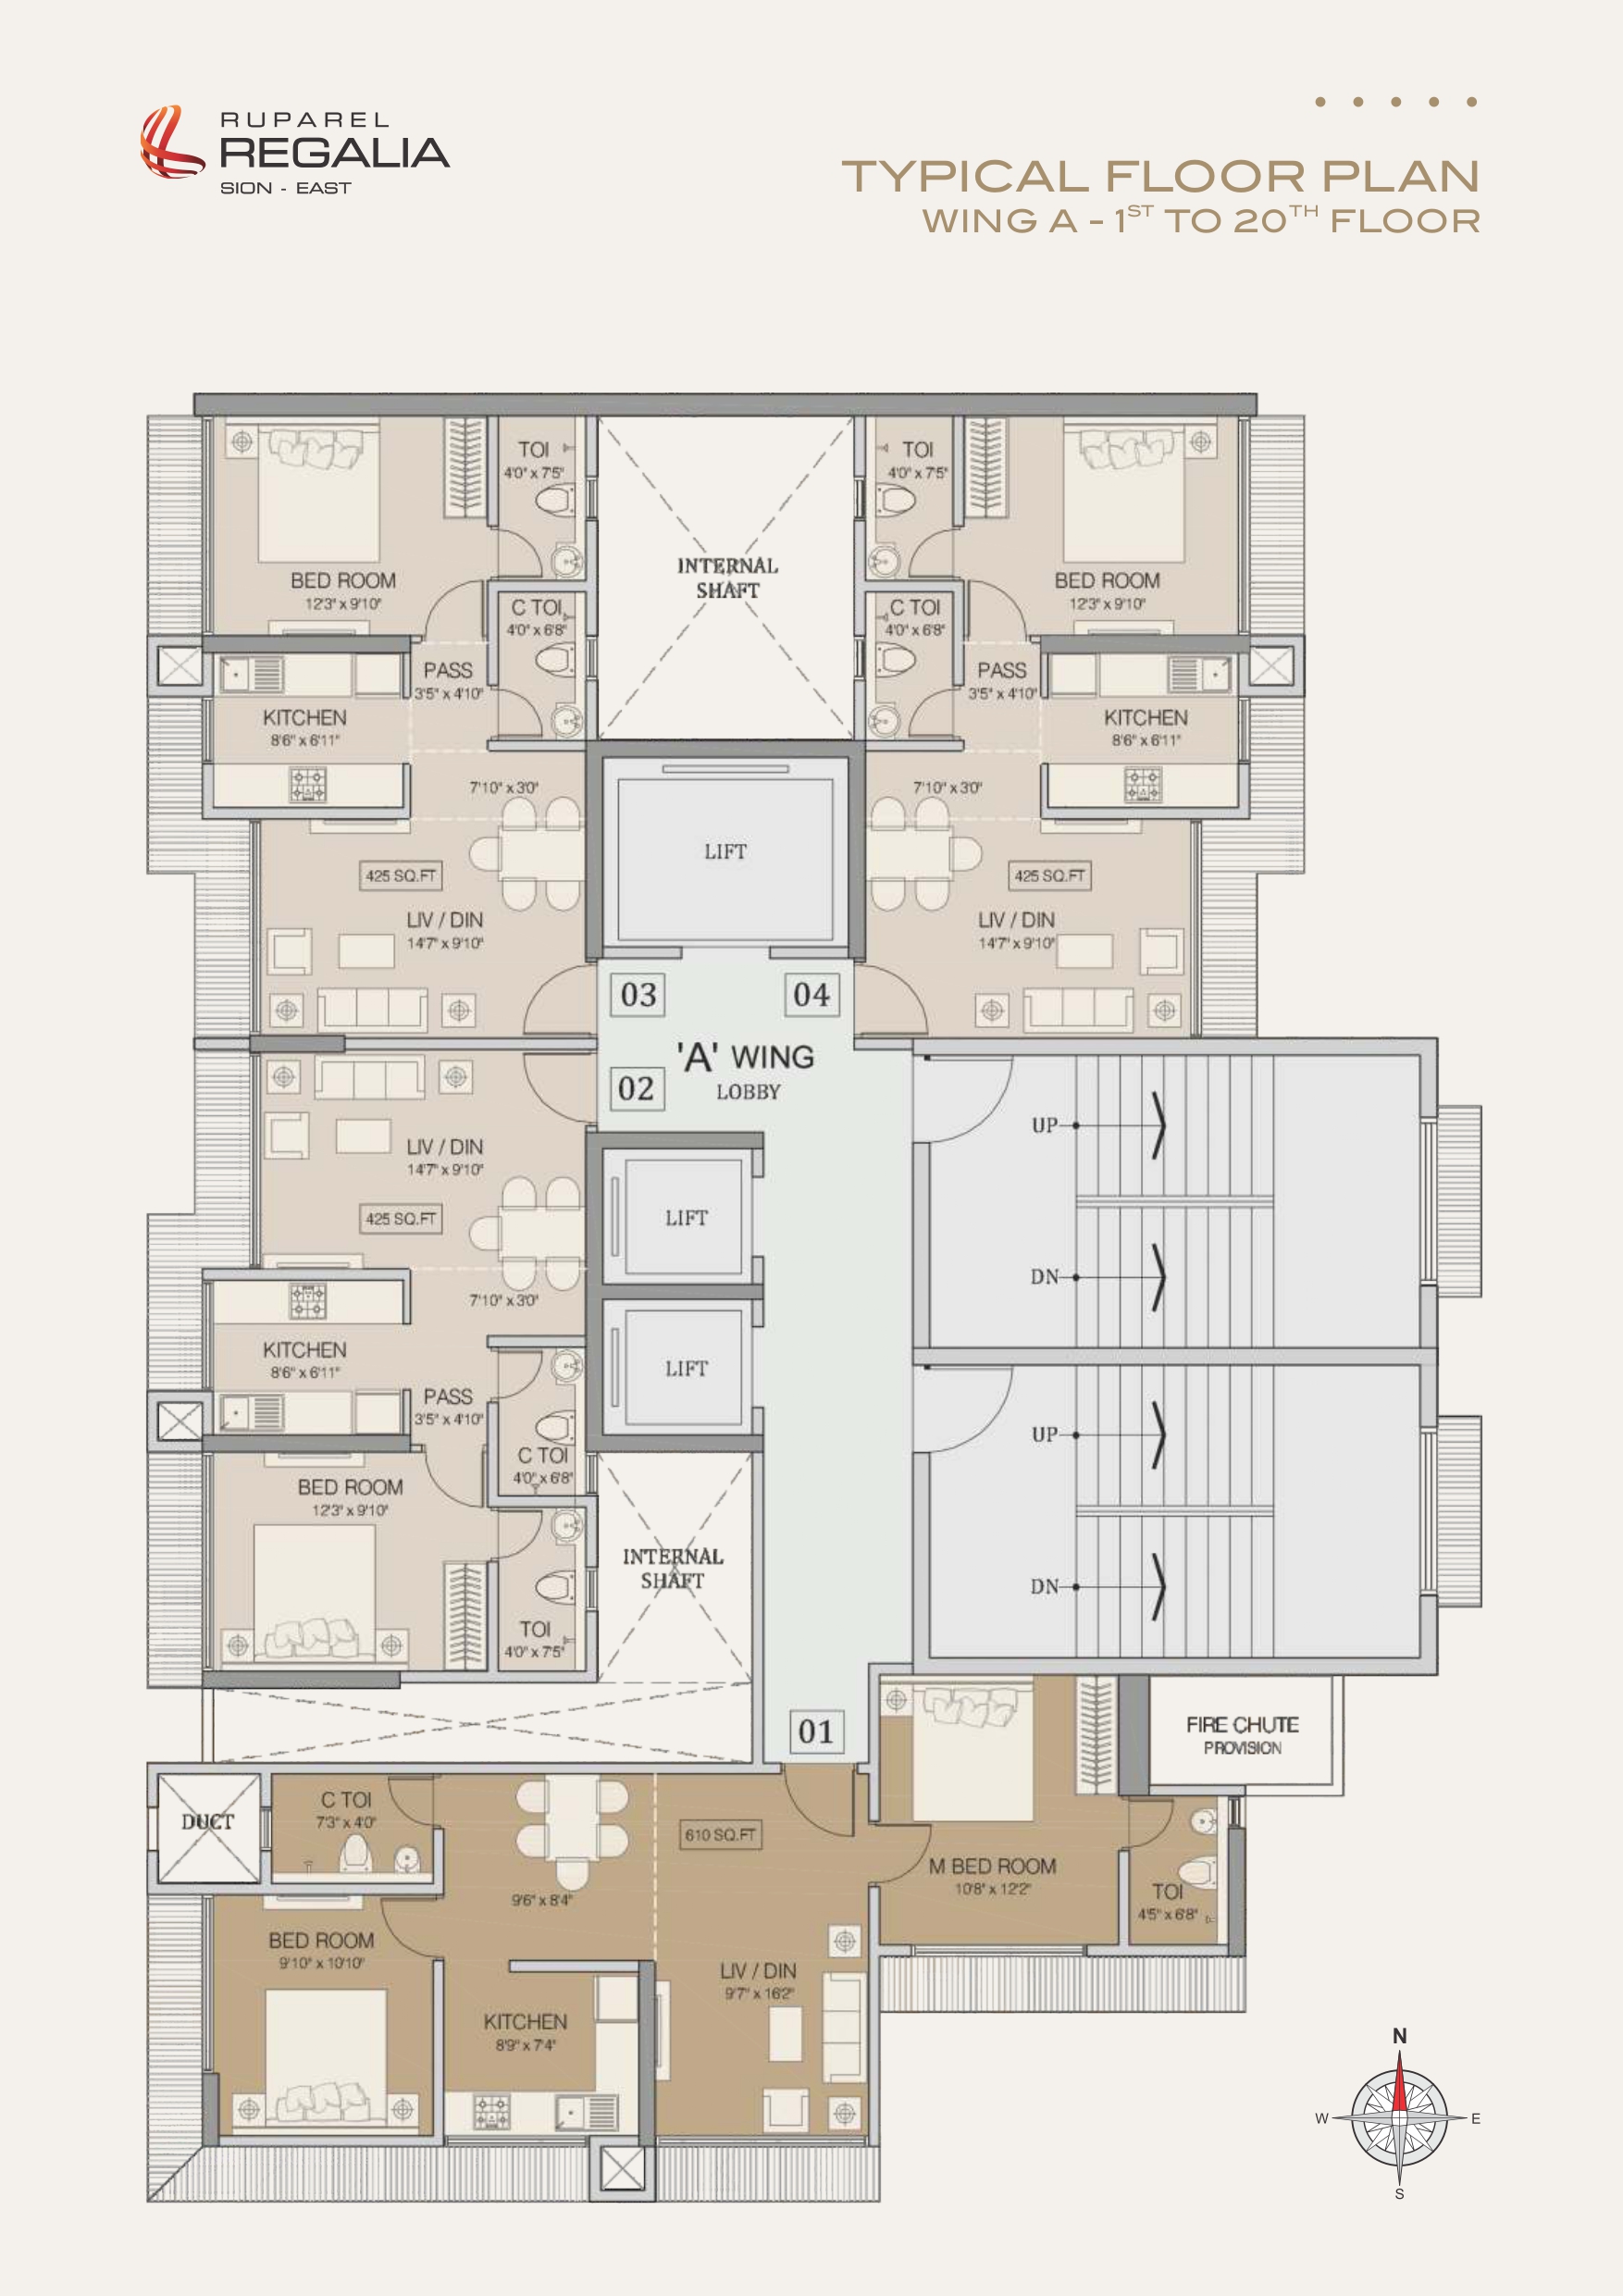 TYPICAL FLOOR PLAN<BR>WING A - 1ST TO 20TH FLOOR